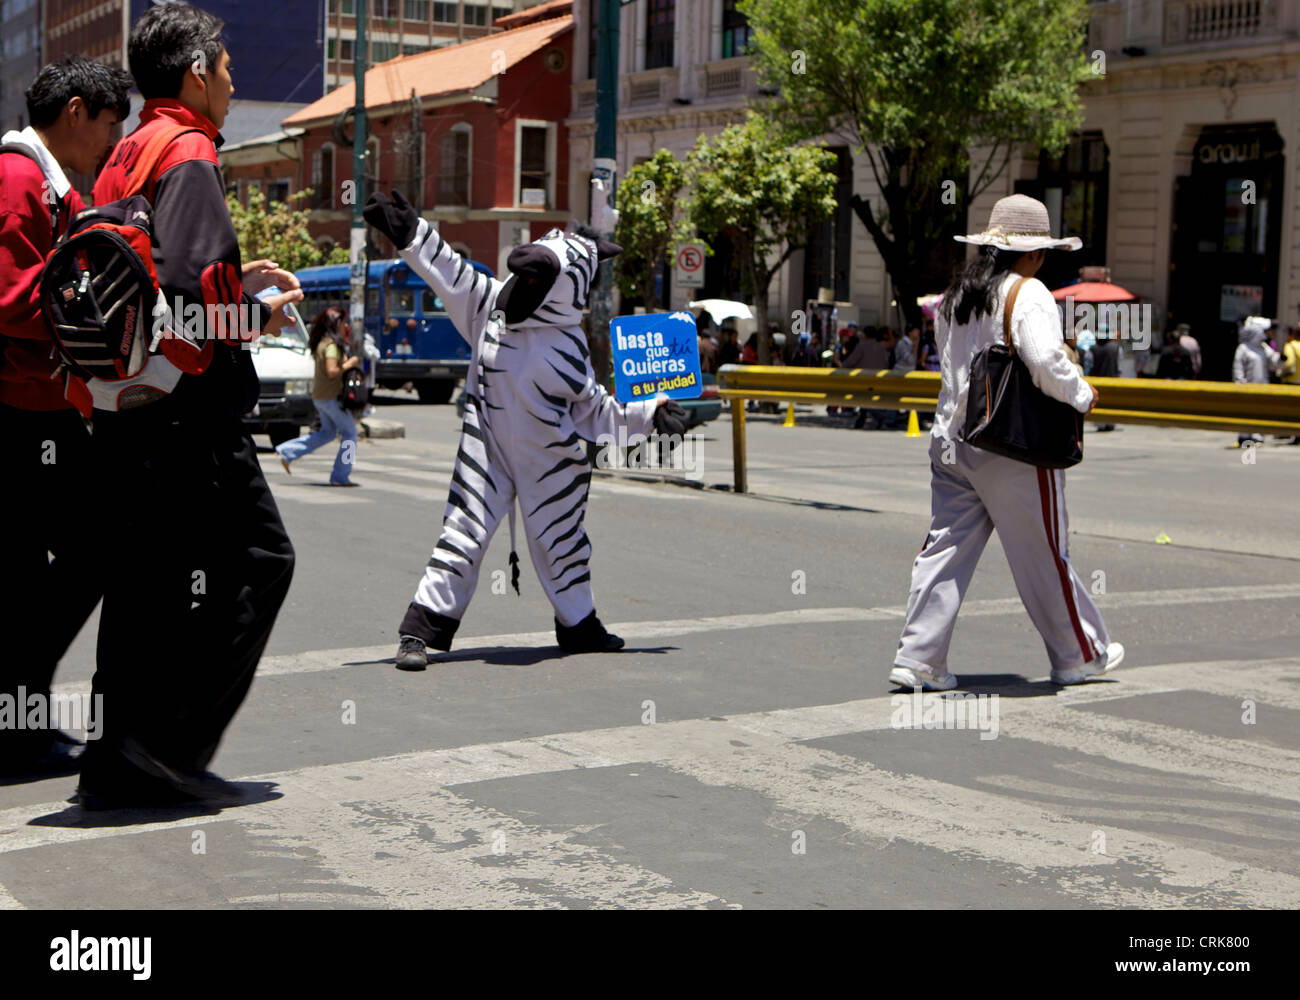 Bolivian Traffic Zebras helping you to cross the road safely in La Paz, Bolivia, South America Stock Photo